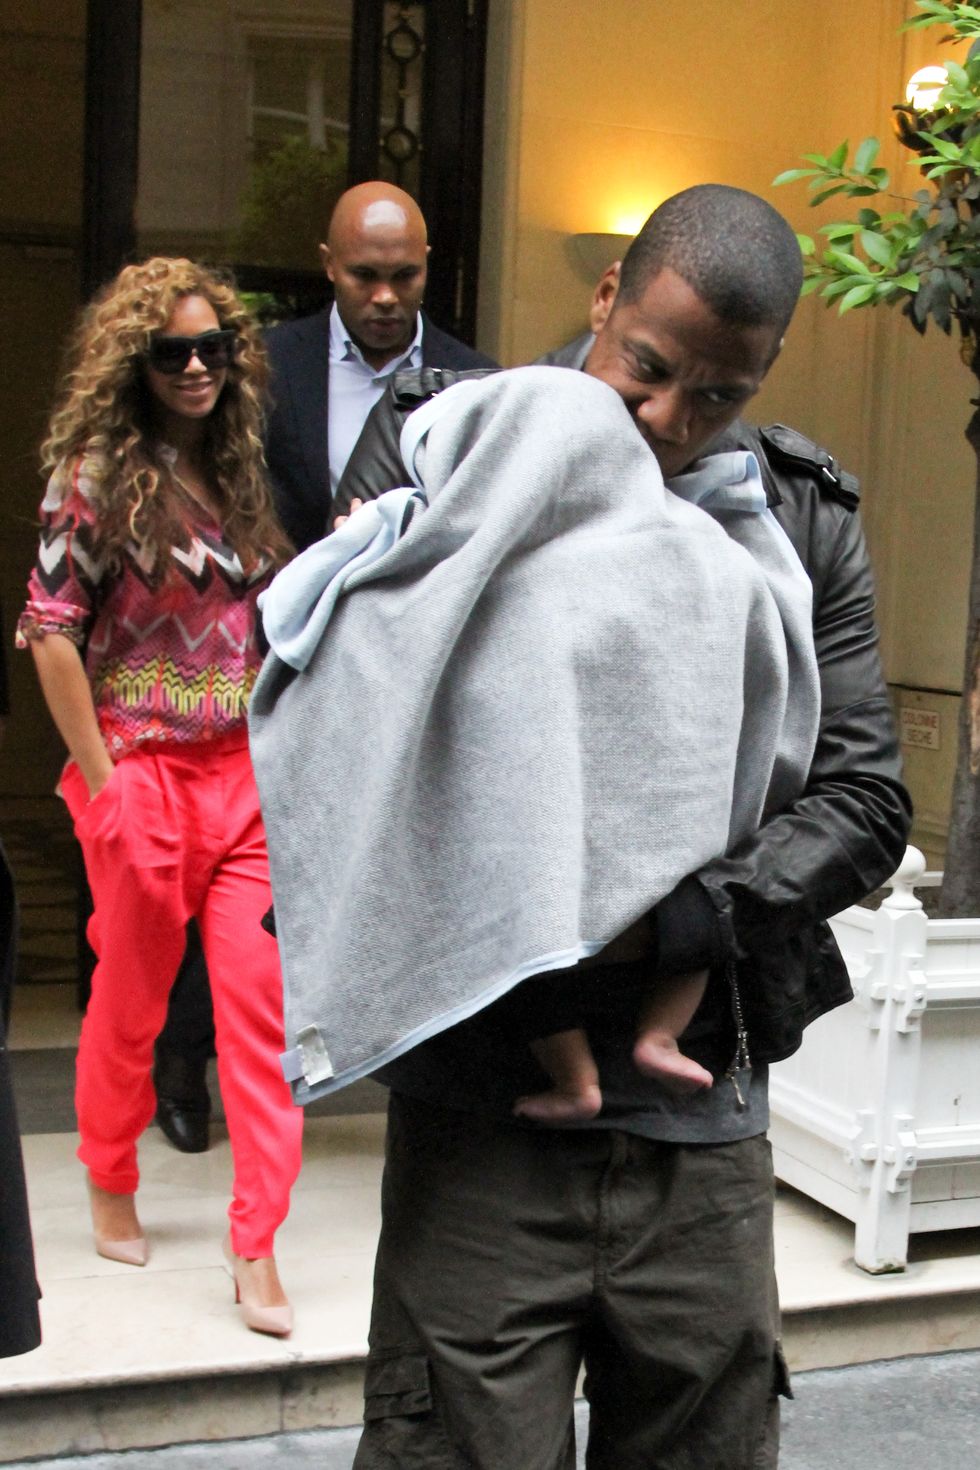 beyonce and jay z sighting in paris june 4, 2012